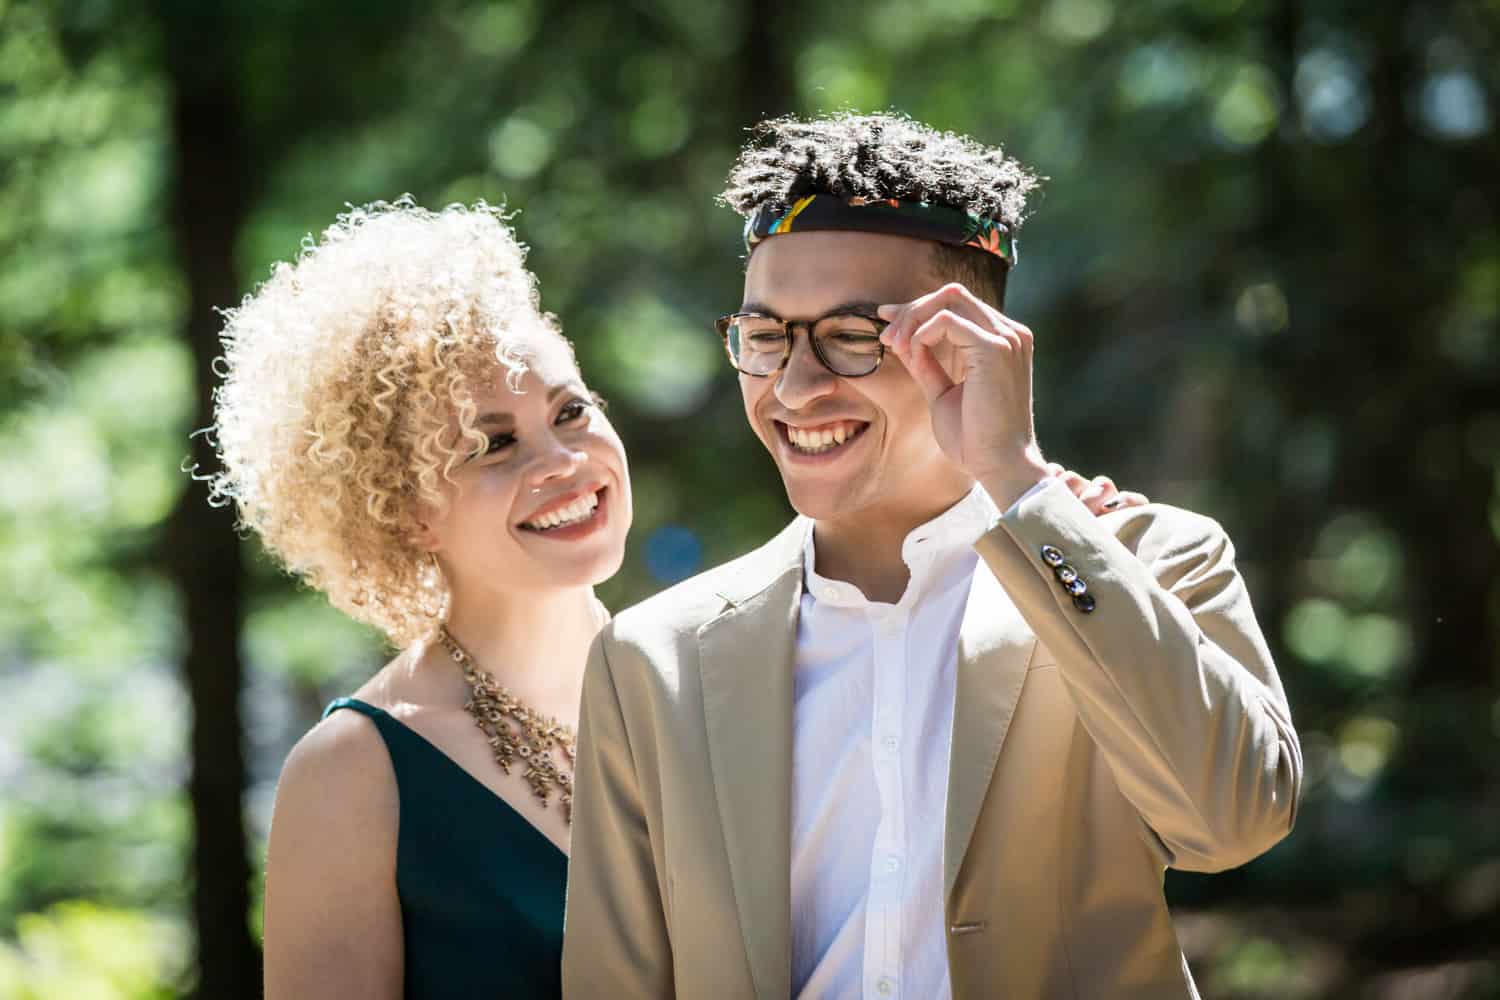 Mother and son touching sunglasses during a family reunion portrait